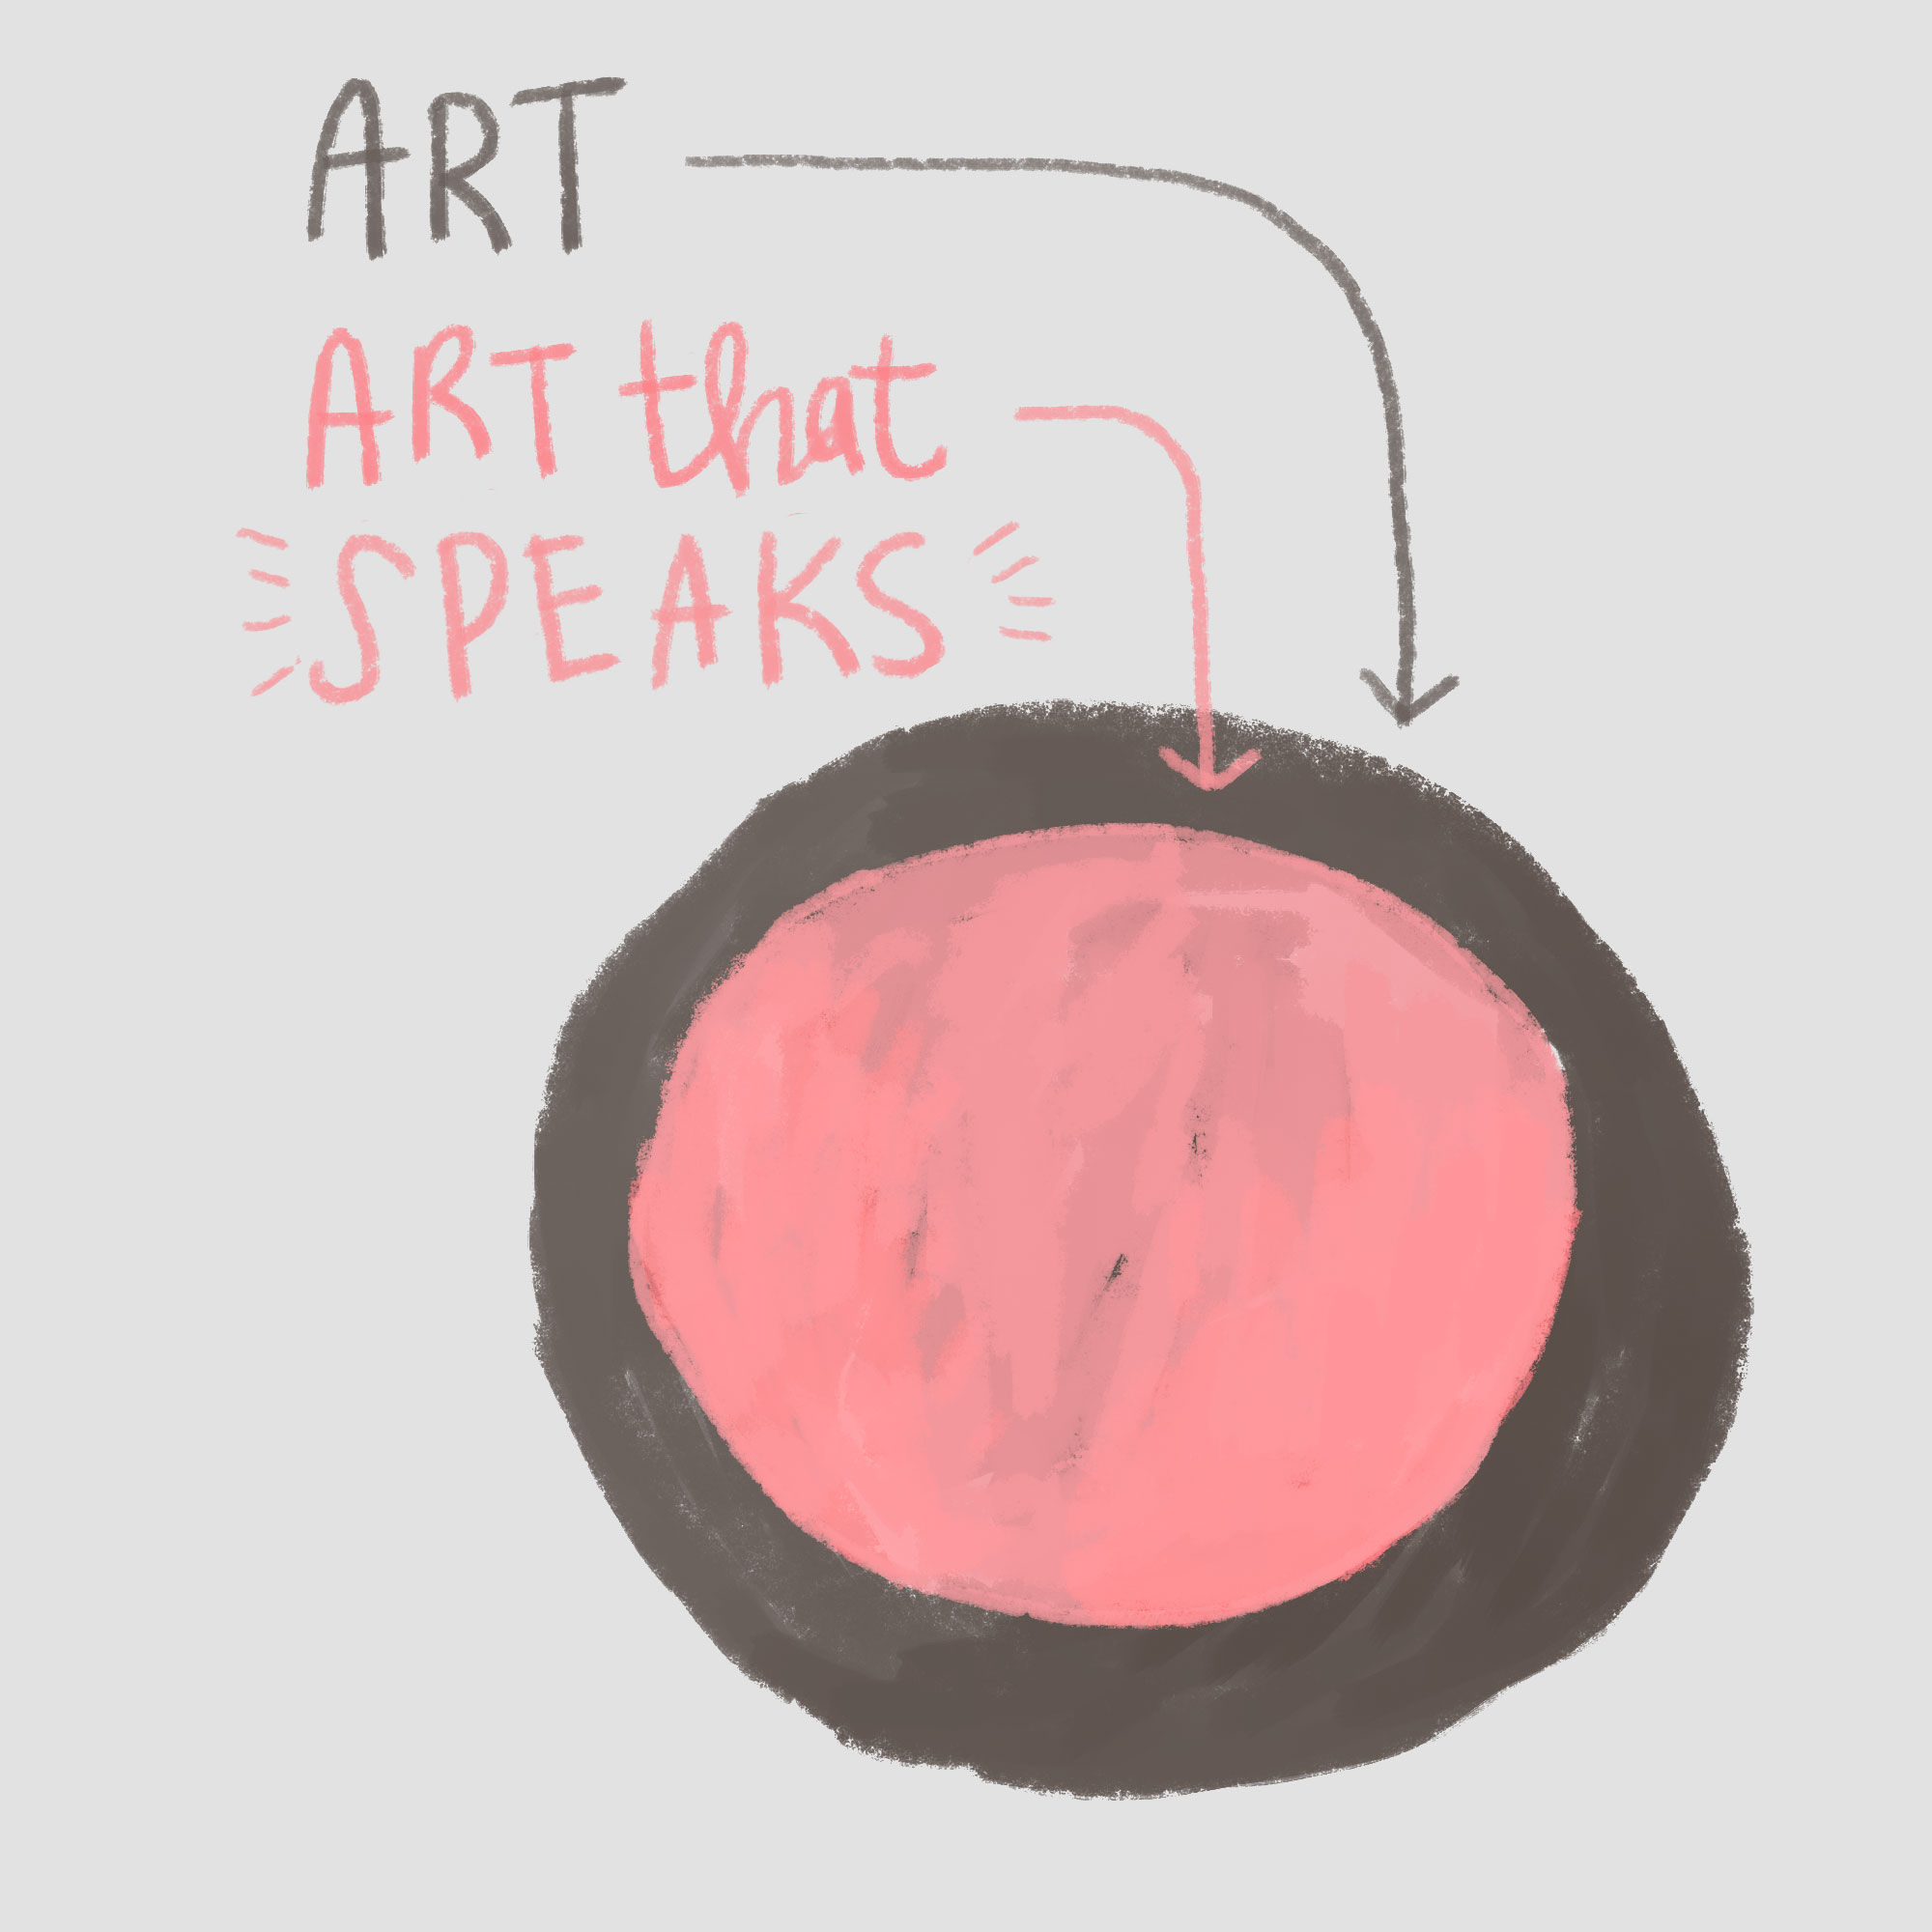 Art that speaks with a red and black circle.